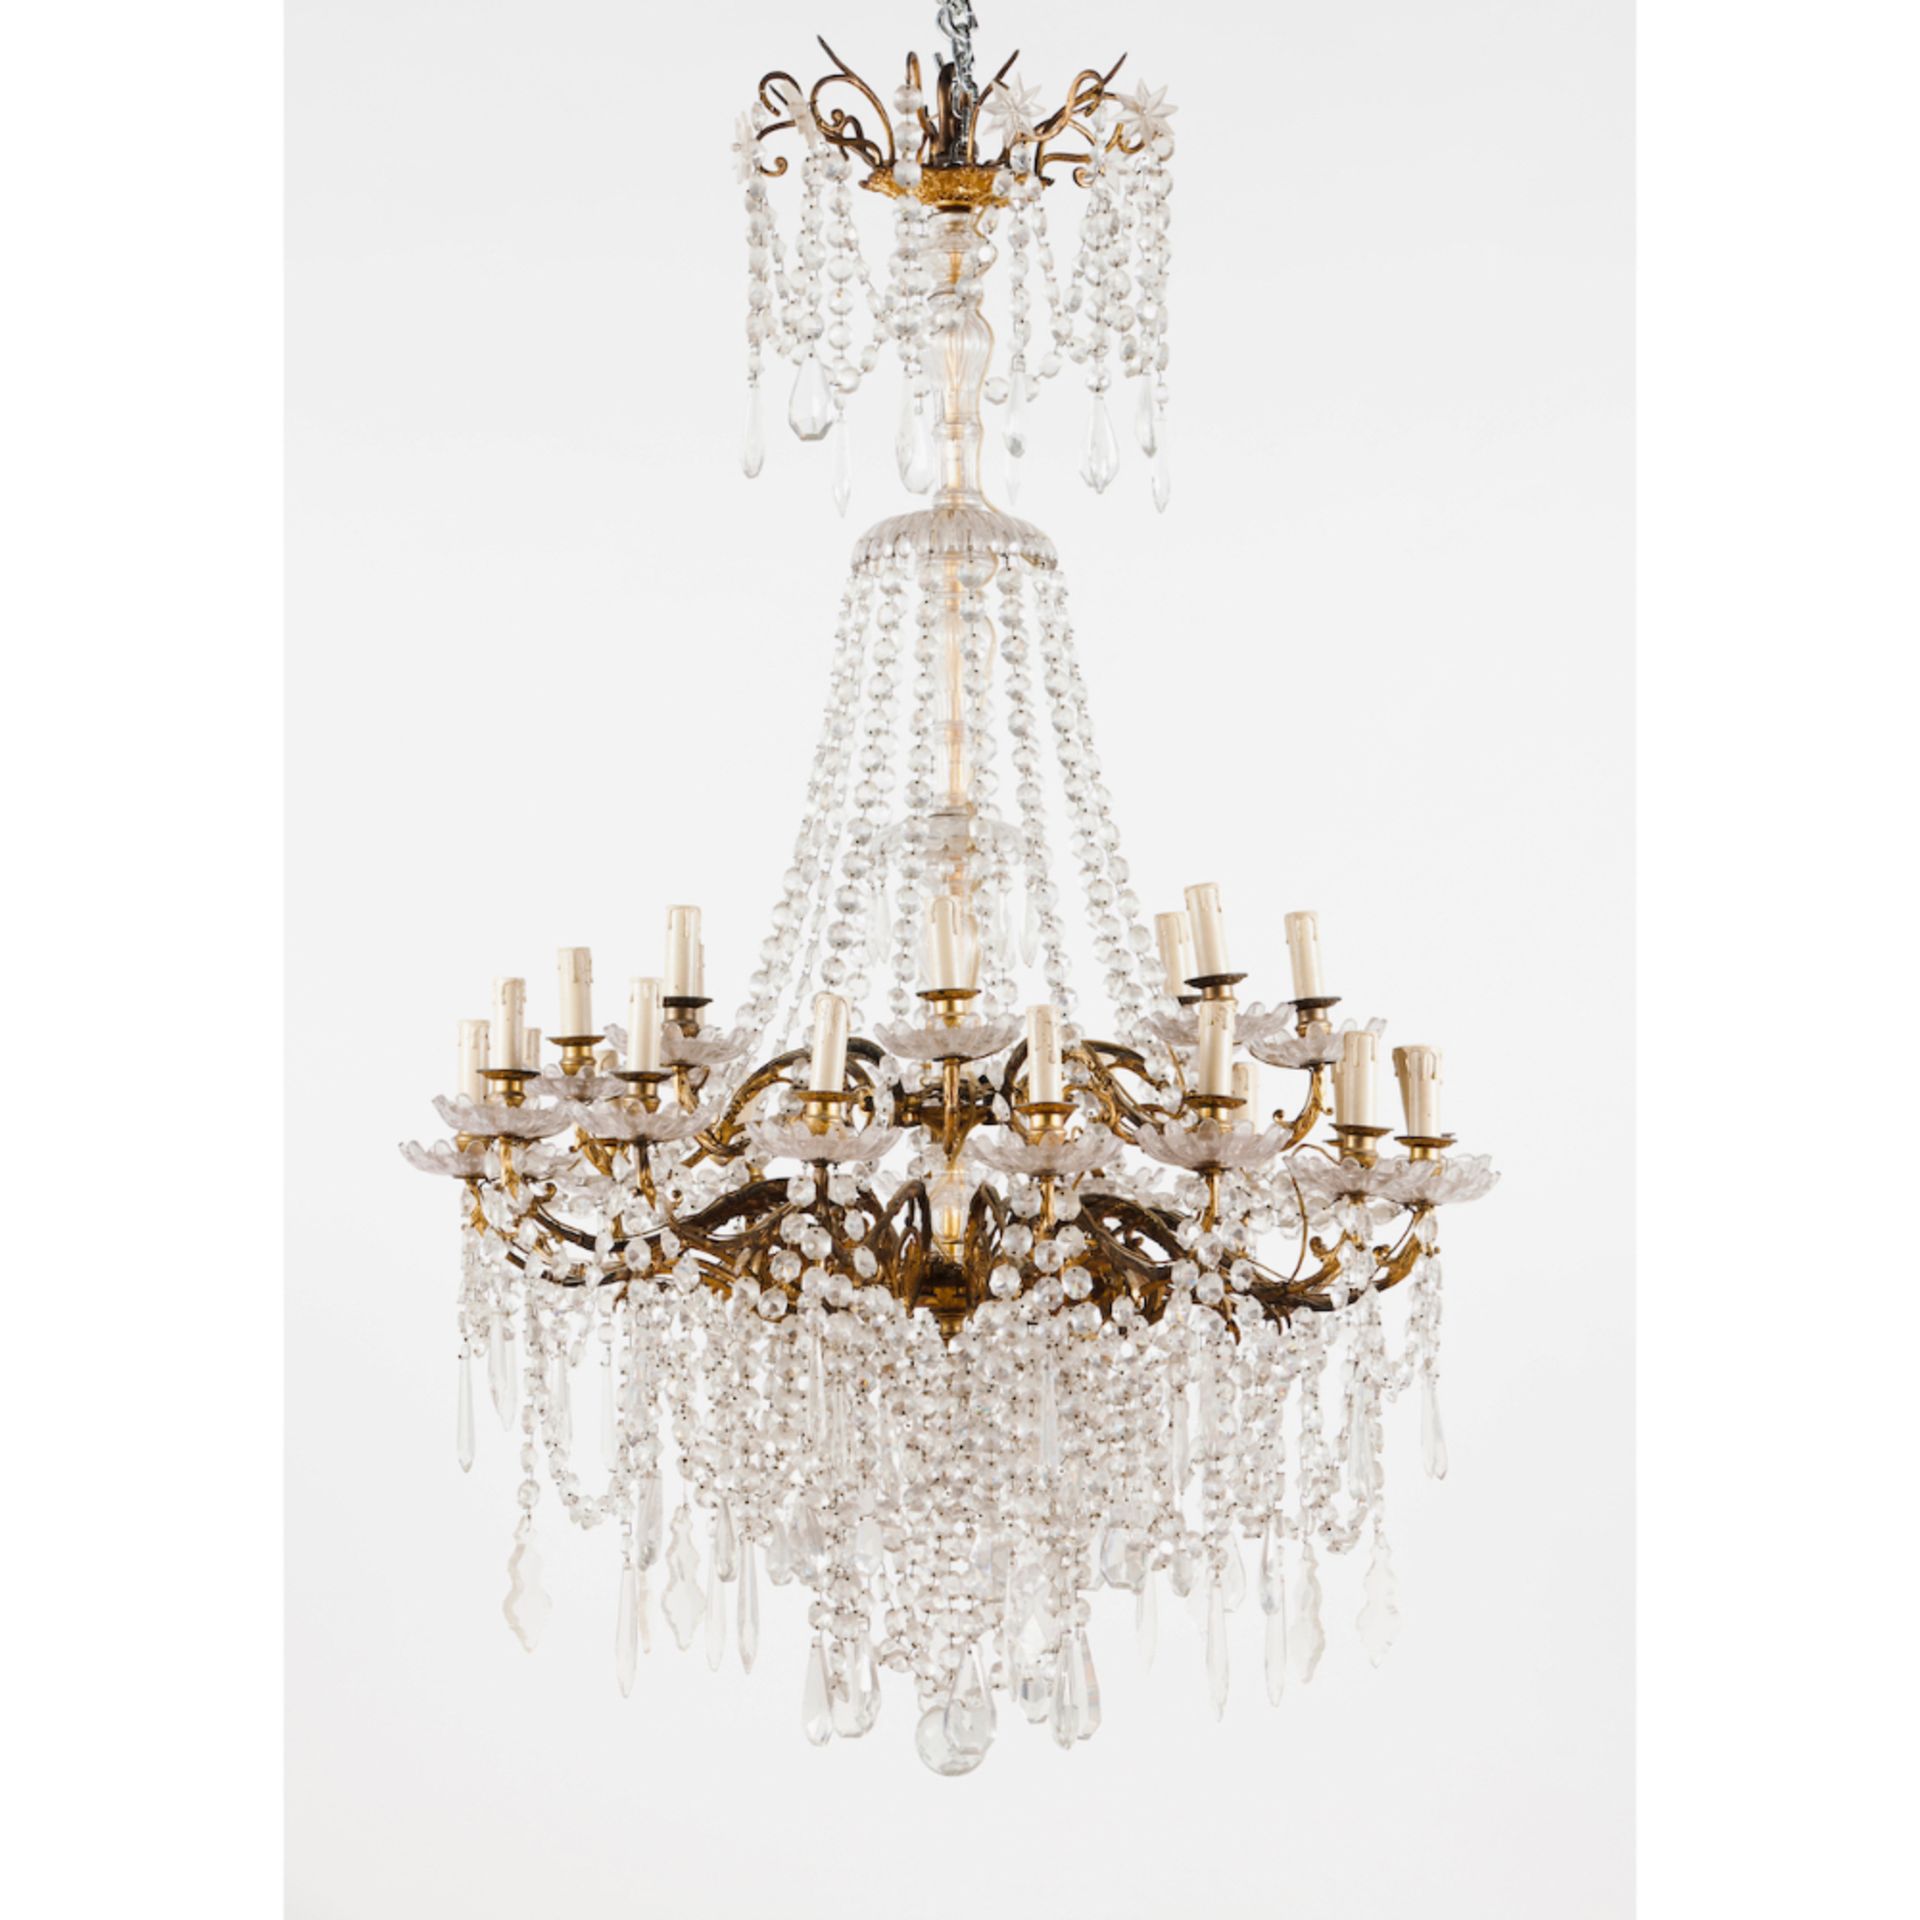 A twenty branch chandelierGlass and crystal drops Yellow metal frame Europe, 19th century140x90 cm